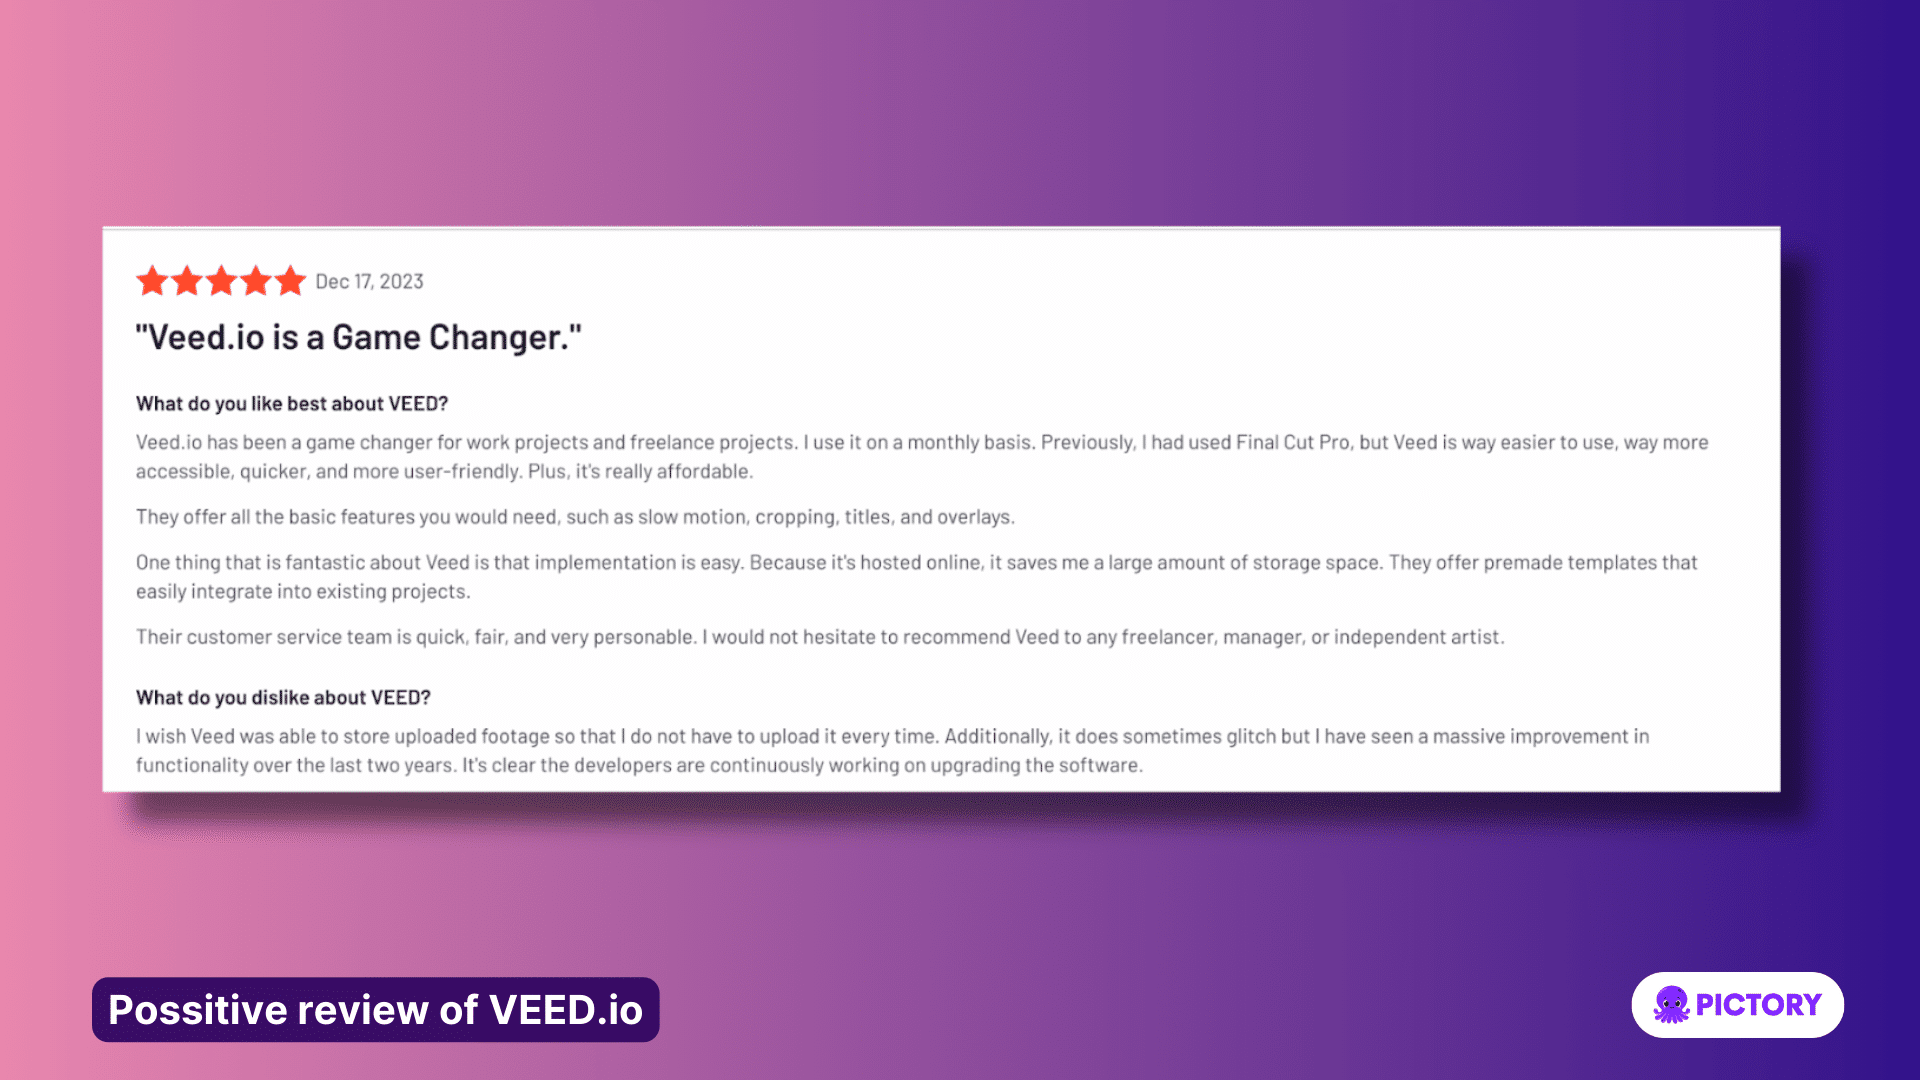 positive review of veed